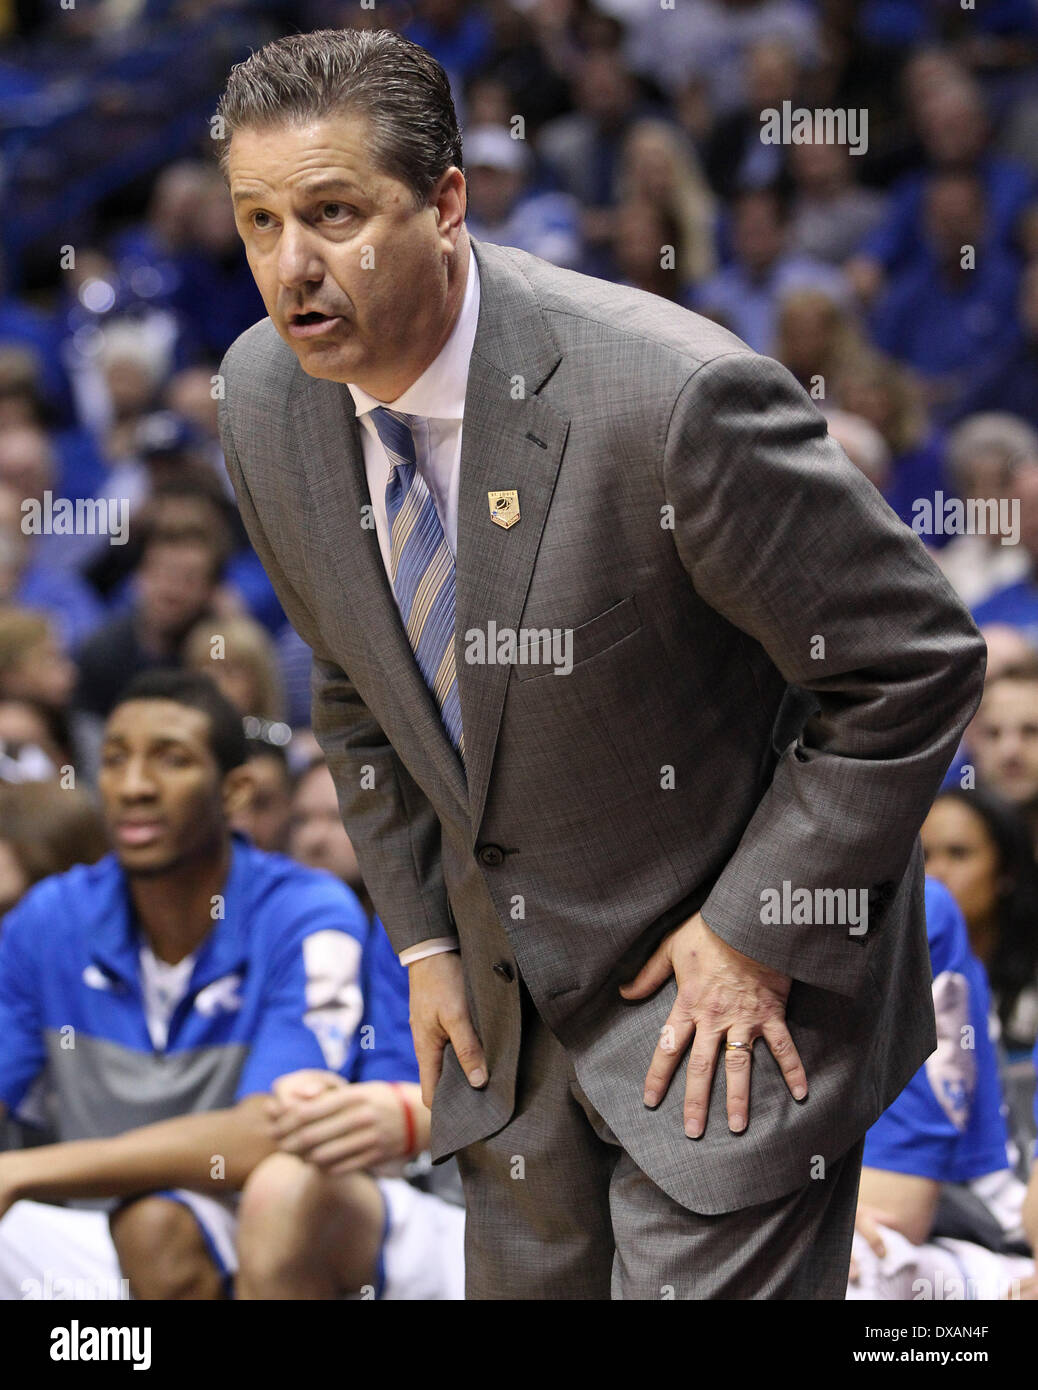 St.Louis, MO, USA. 21st Mar, 2014. Kentucky Wildcats head coach John Calipari quietly called a play on an inbounds pass as Kentucky defeated Kansas State 56-49 in the NCAA tournament on Friday March 21, 2014 in St. Louis, MO. Photo by Mark Cornelison | Staff © Lexington Herald-Leader/ZUMAPRESS.com/Alamy Live News Stock Photo